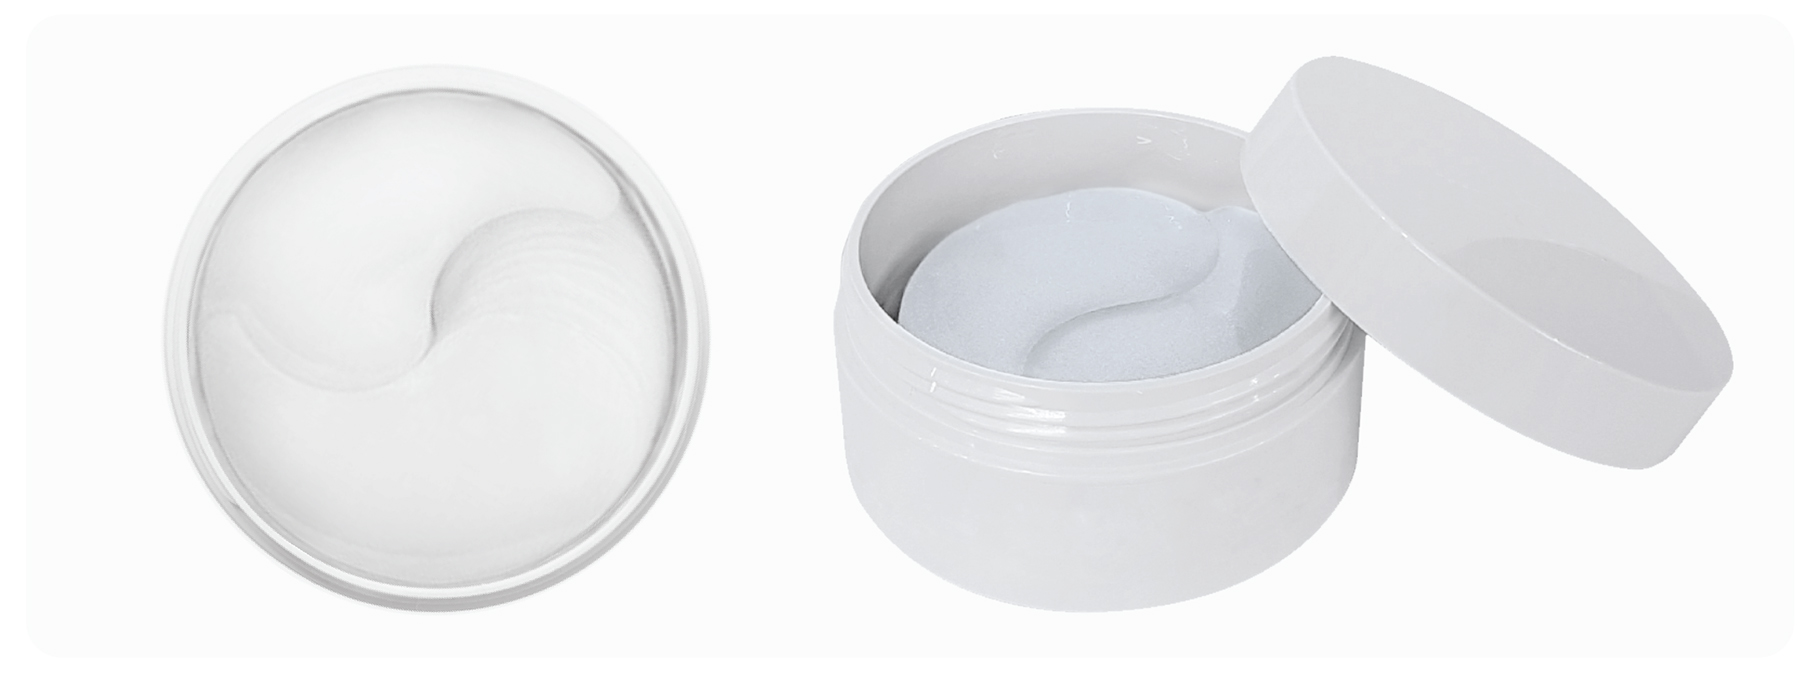 Top view and front view of hydrogel eyepatch jar